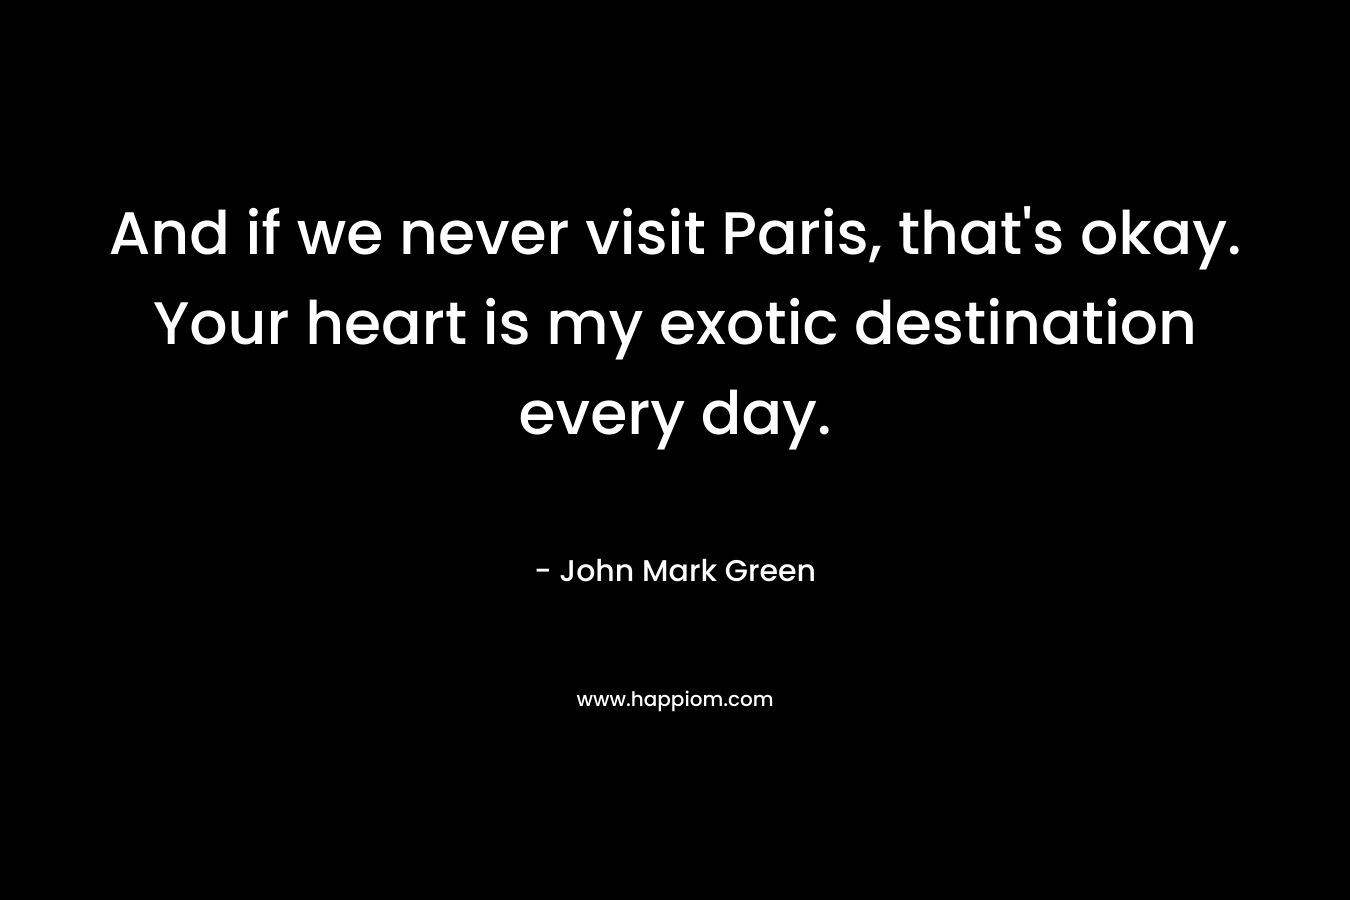 And if we never visit Paris, that's okay. Your heart is my exotic destination every day.